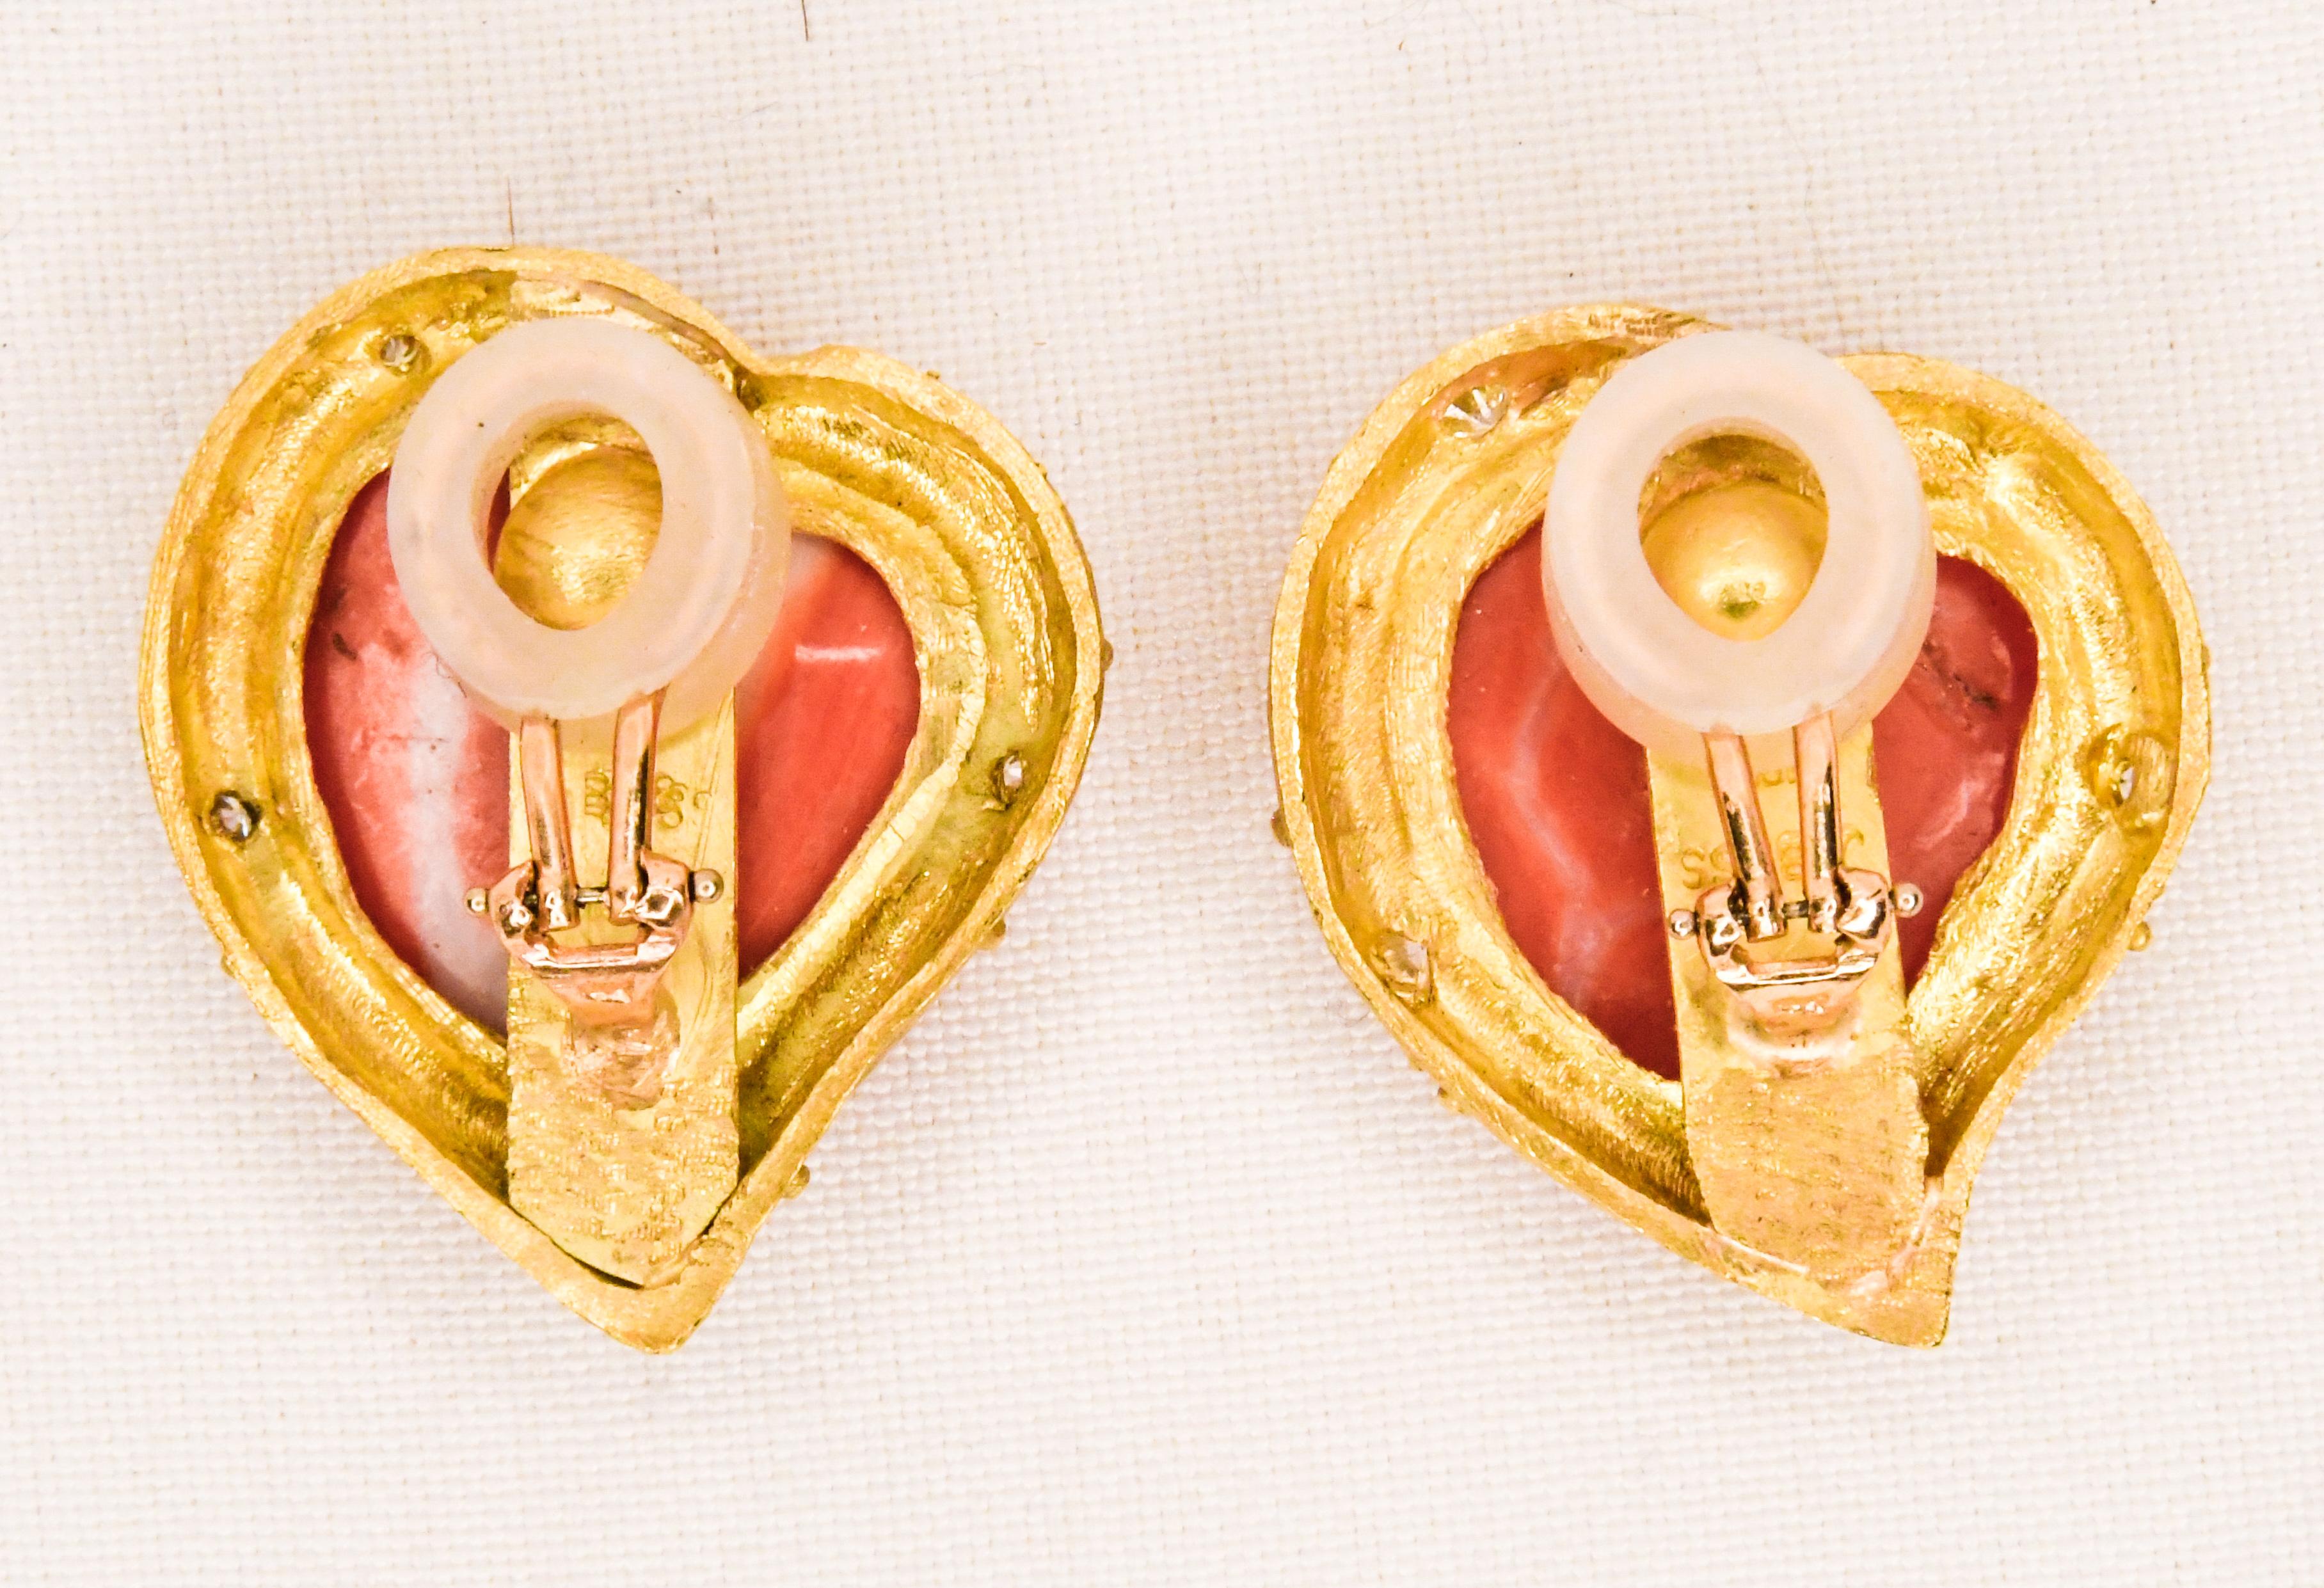 Celebrated Palm Beach designer, Julia Boss, creates timeless original one of a kind designs in 18K or 24K. Her client list is a who's who and her collections are featured in Neiman Marcus and boutiques world wide. These fabulous heart shape earrings